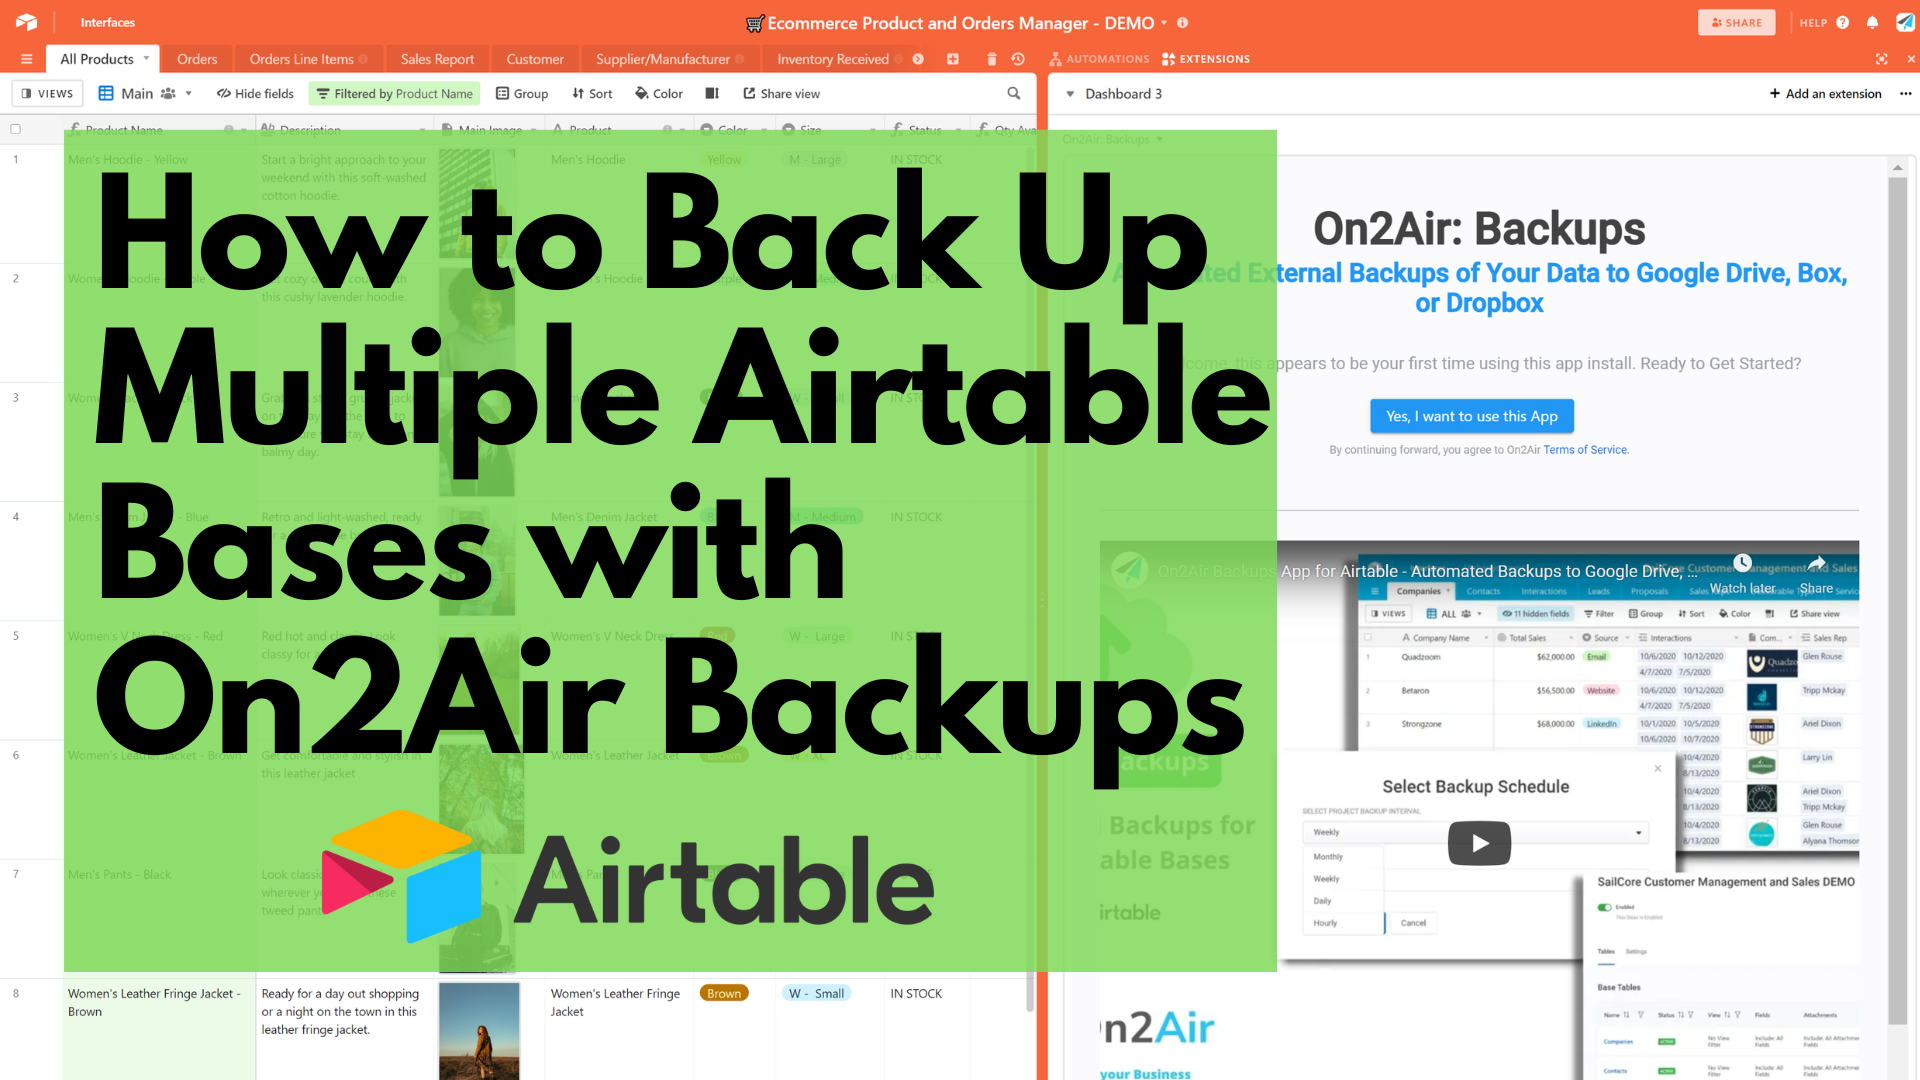 How to Back Up Multiple Airtable Bases with On2Air Backups